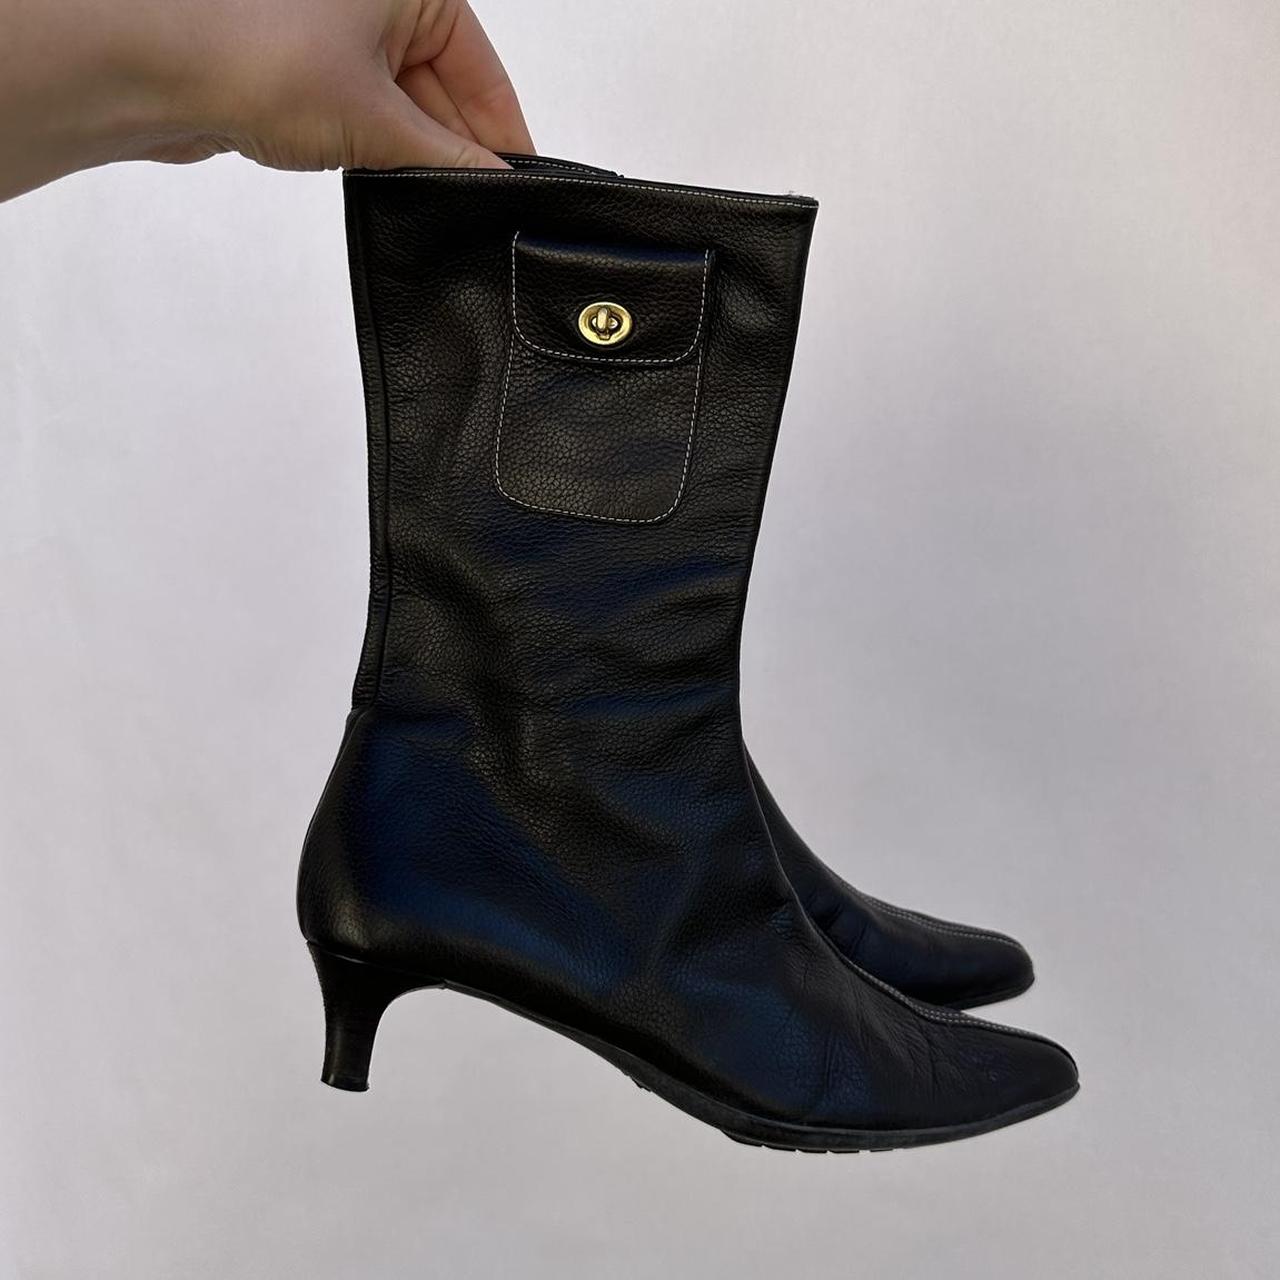 Coach Women's Gold and Black Boots